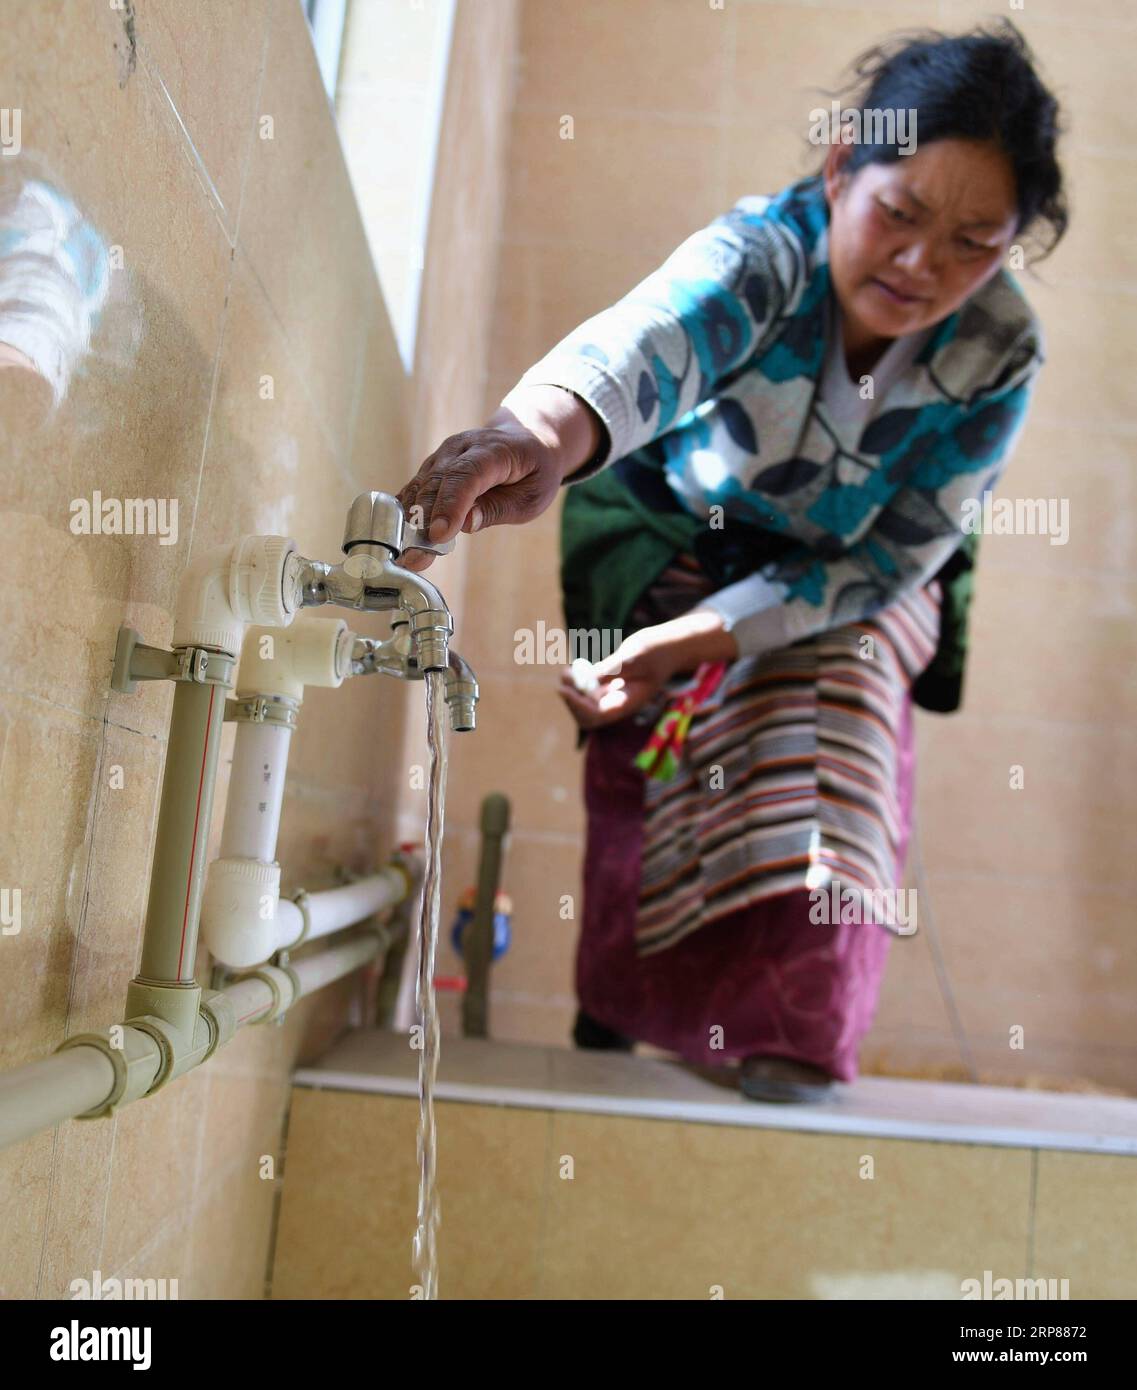 (190221) -- BEIJING, Feb. 21, 2019 -- A relocated resident pours water into a hot spring pool in Yangbajing Town of Damxung County in Lhasa, southwest China s Tibet Autonomous Region, Sept. 28, 2017. China has made important and decisive achievements in poverty relief in the past six years, and will continue its efforts this year to lay a solid foundation for winning the battle against poverty by 2020, an official said Wednesday. In the past six years, China lifted 82.39 million rural poor out of poverty, with the rural poor population down from 98.99 million at the end of 2012 to 16.6 million Stock Photo